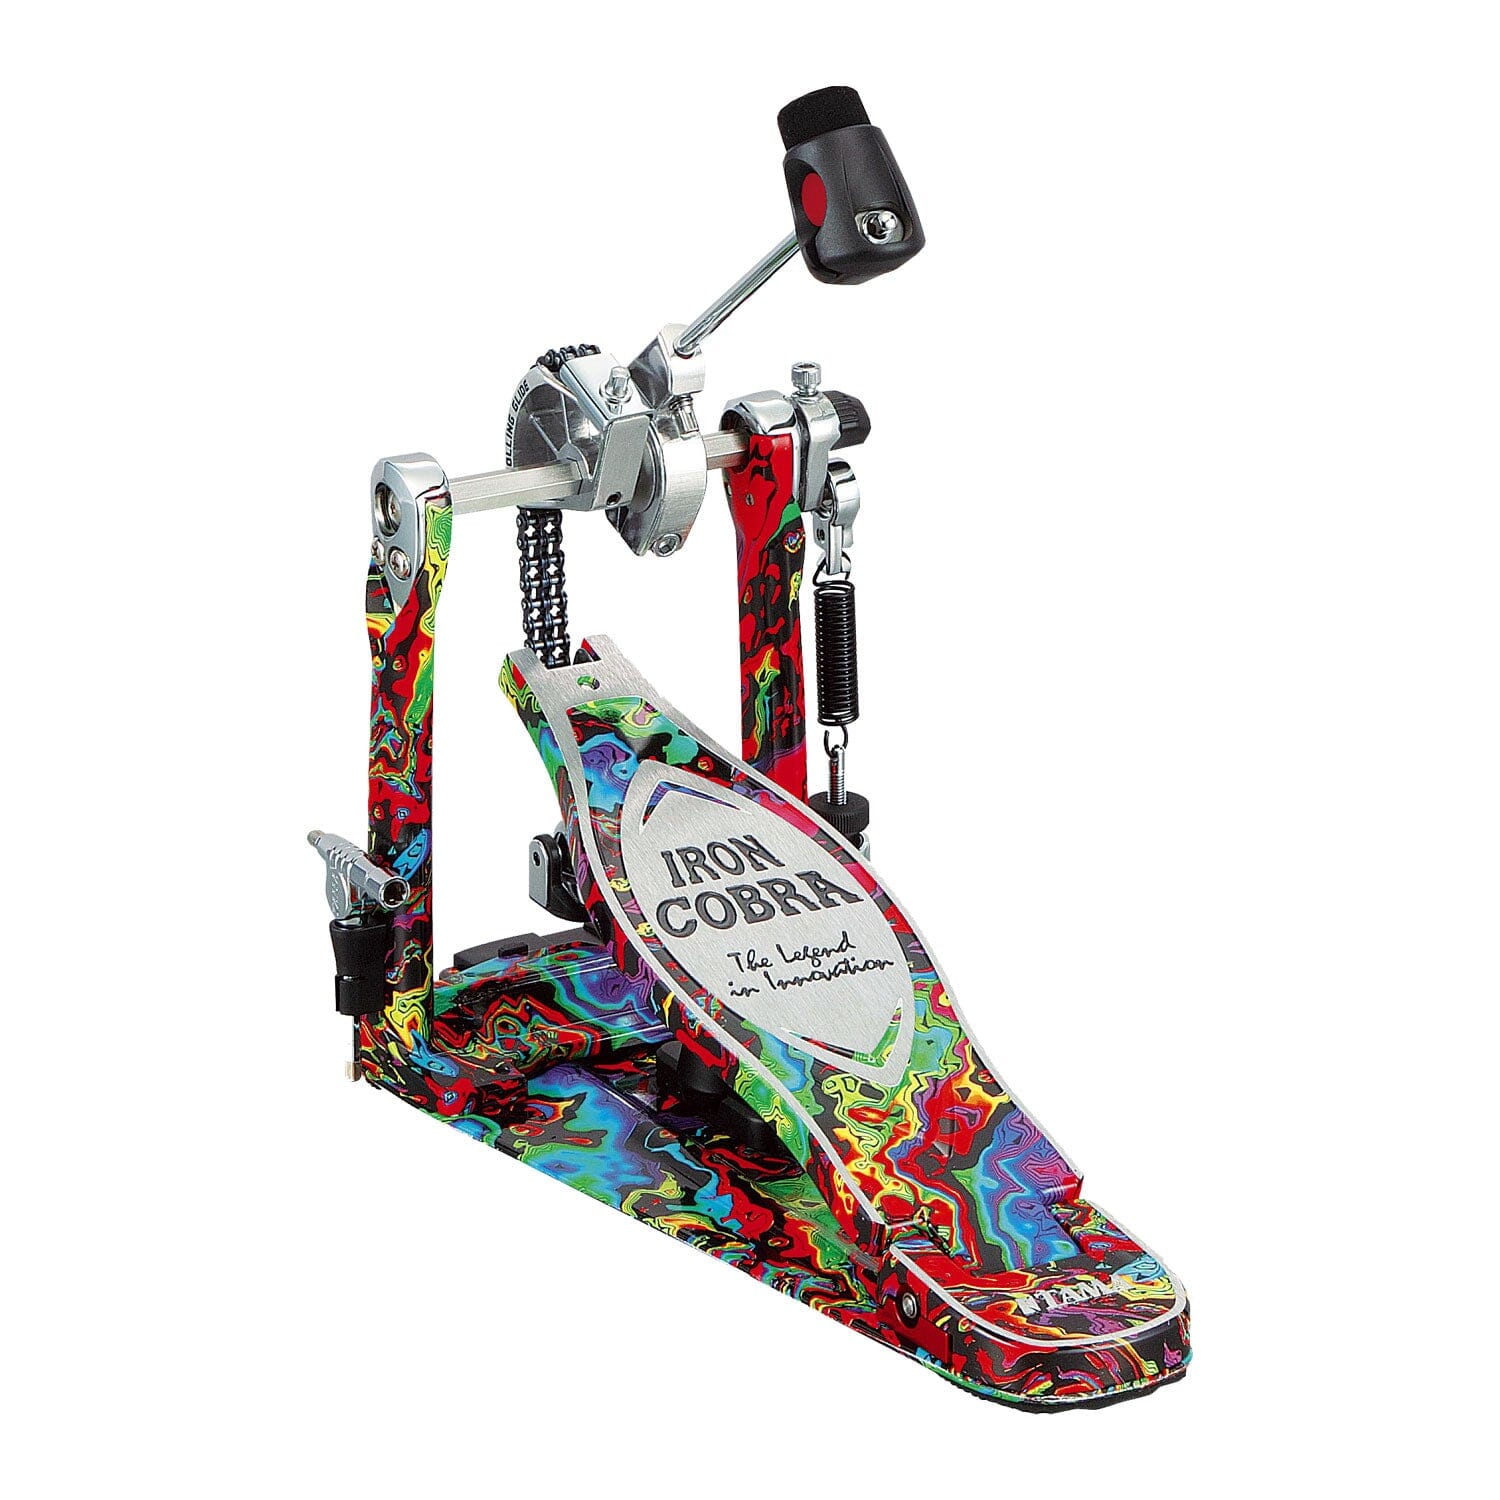 Tama 50th Limited Iron Cobra Marble Single Drum Pedal, Psychedelic Rainbow (HP900PMPR) Drum Pedals Tama 